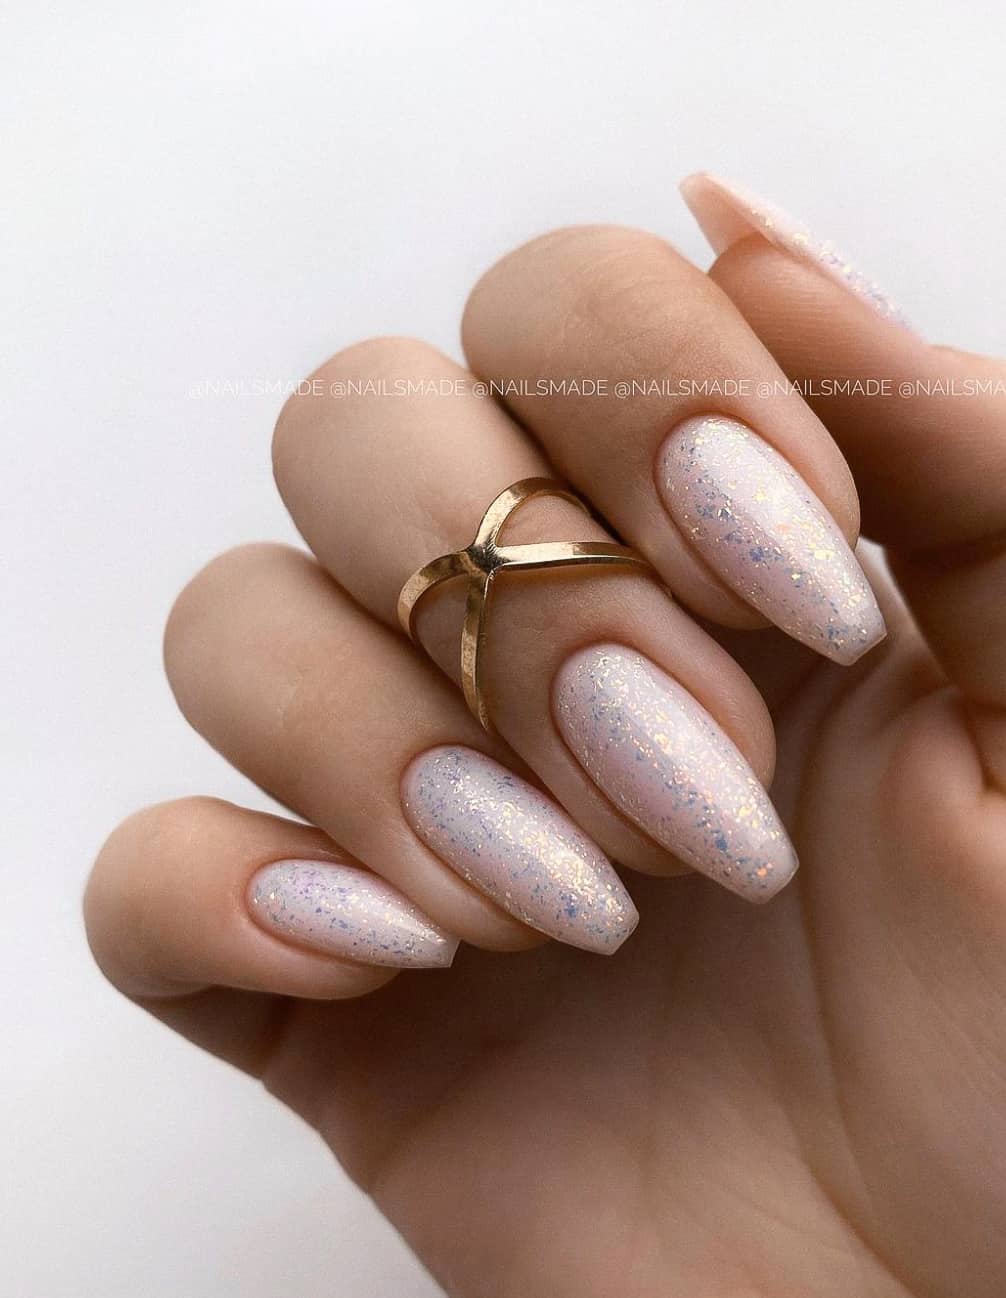 A hand with coffin nails featuring a light pink nail polish and iridescent glitter